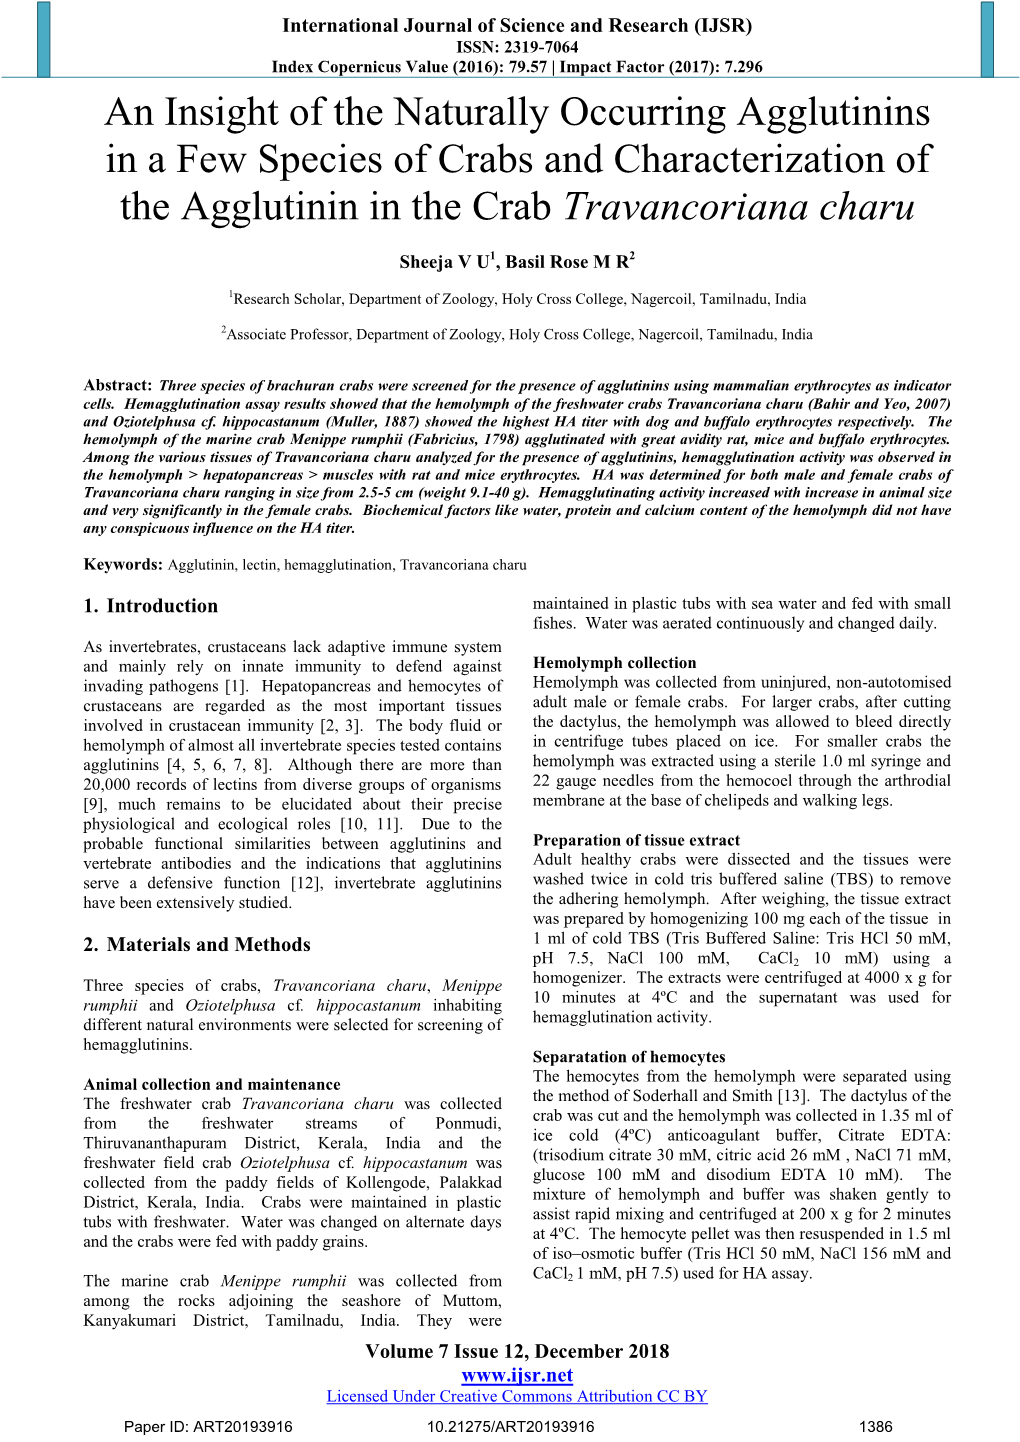 An Insight of the Naturally Occurring Agglutinins in a Few Species of Crabs and Characterization of the Agglutinin in the Crab Travancoriana Charu